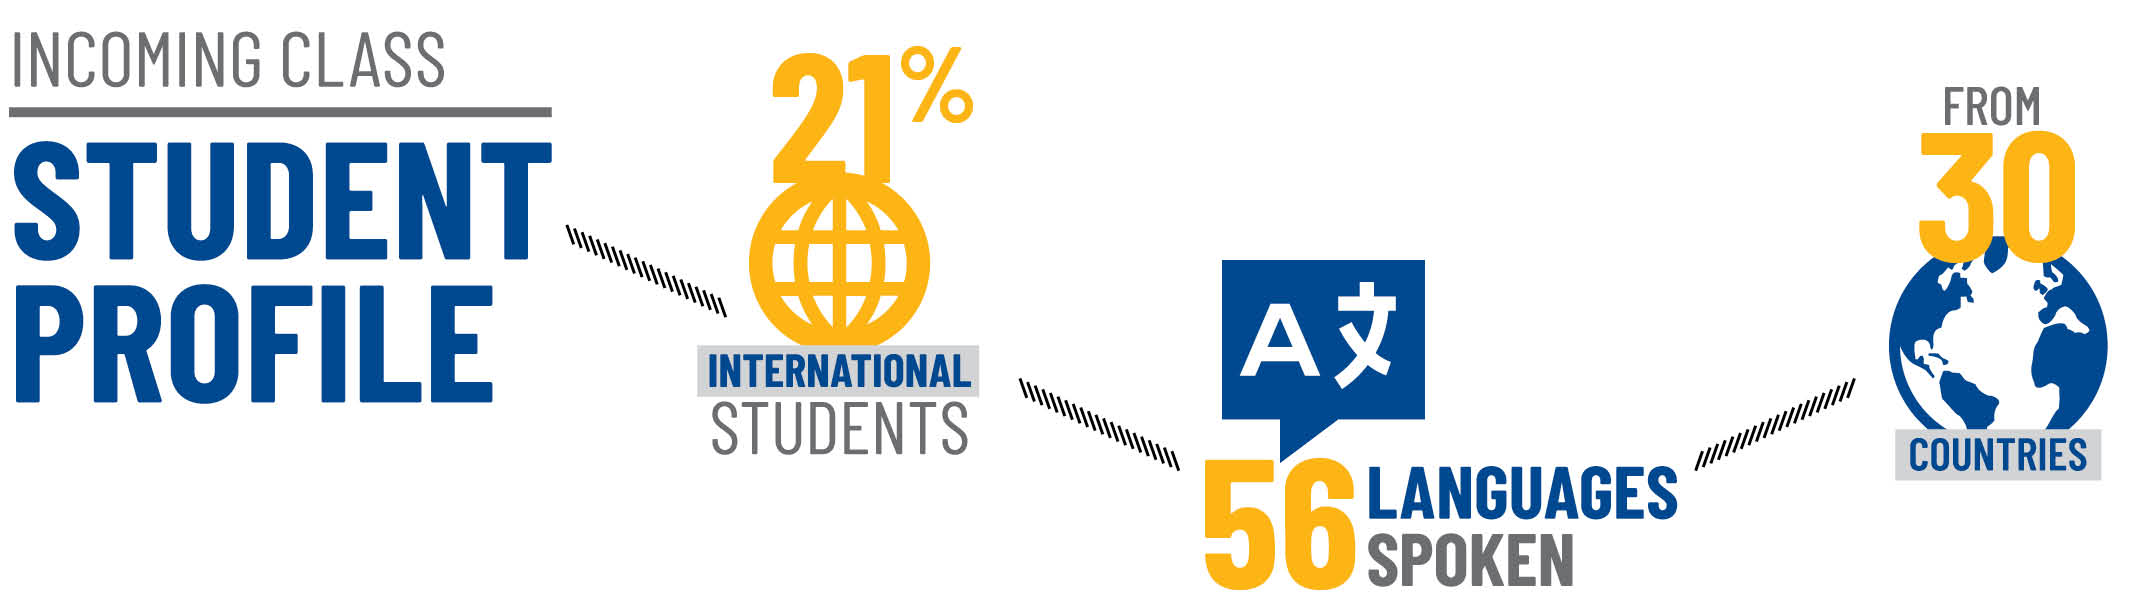 21% international students, 56 languages spoken, from 30 countries